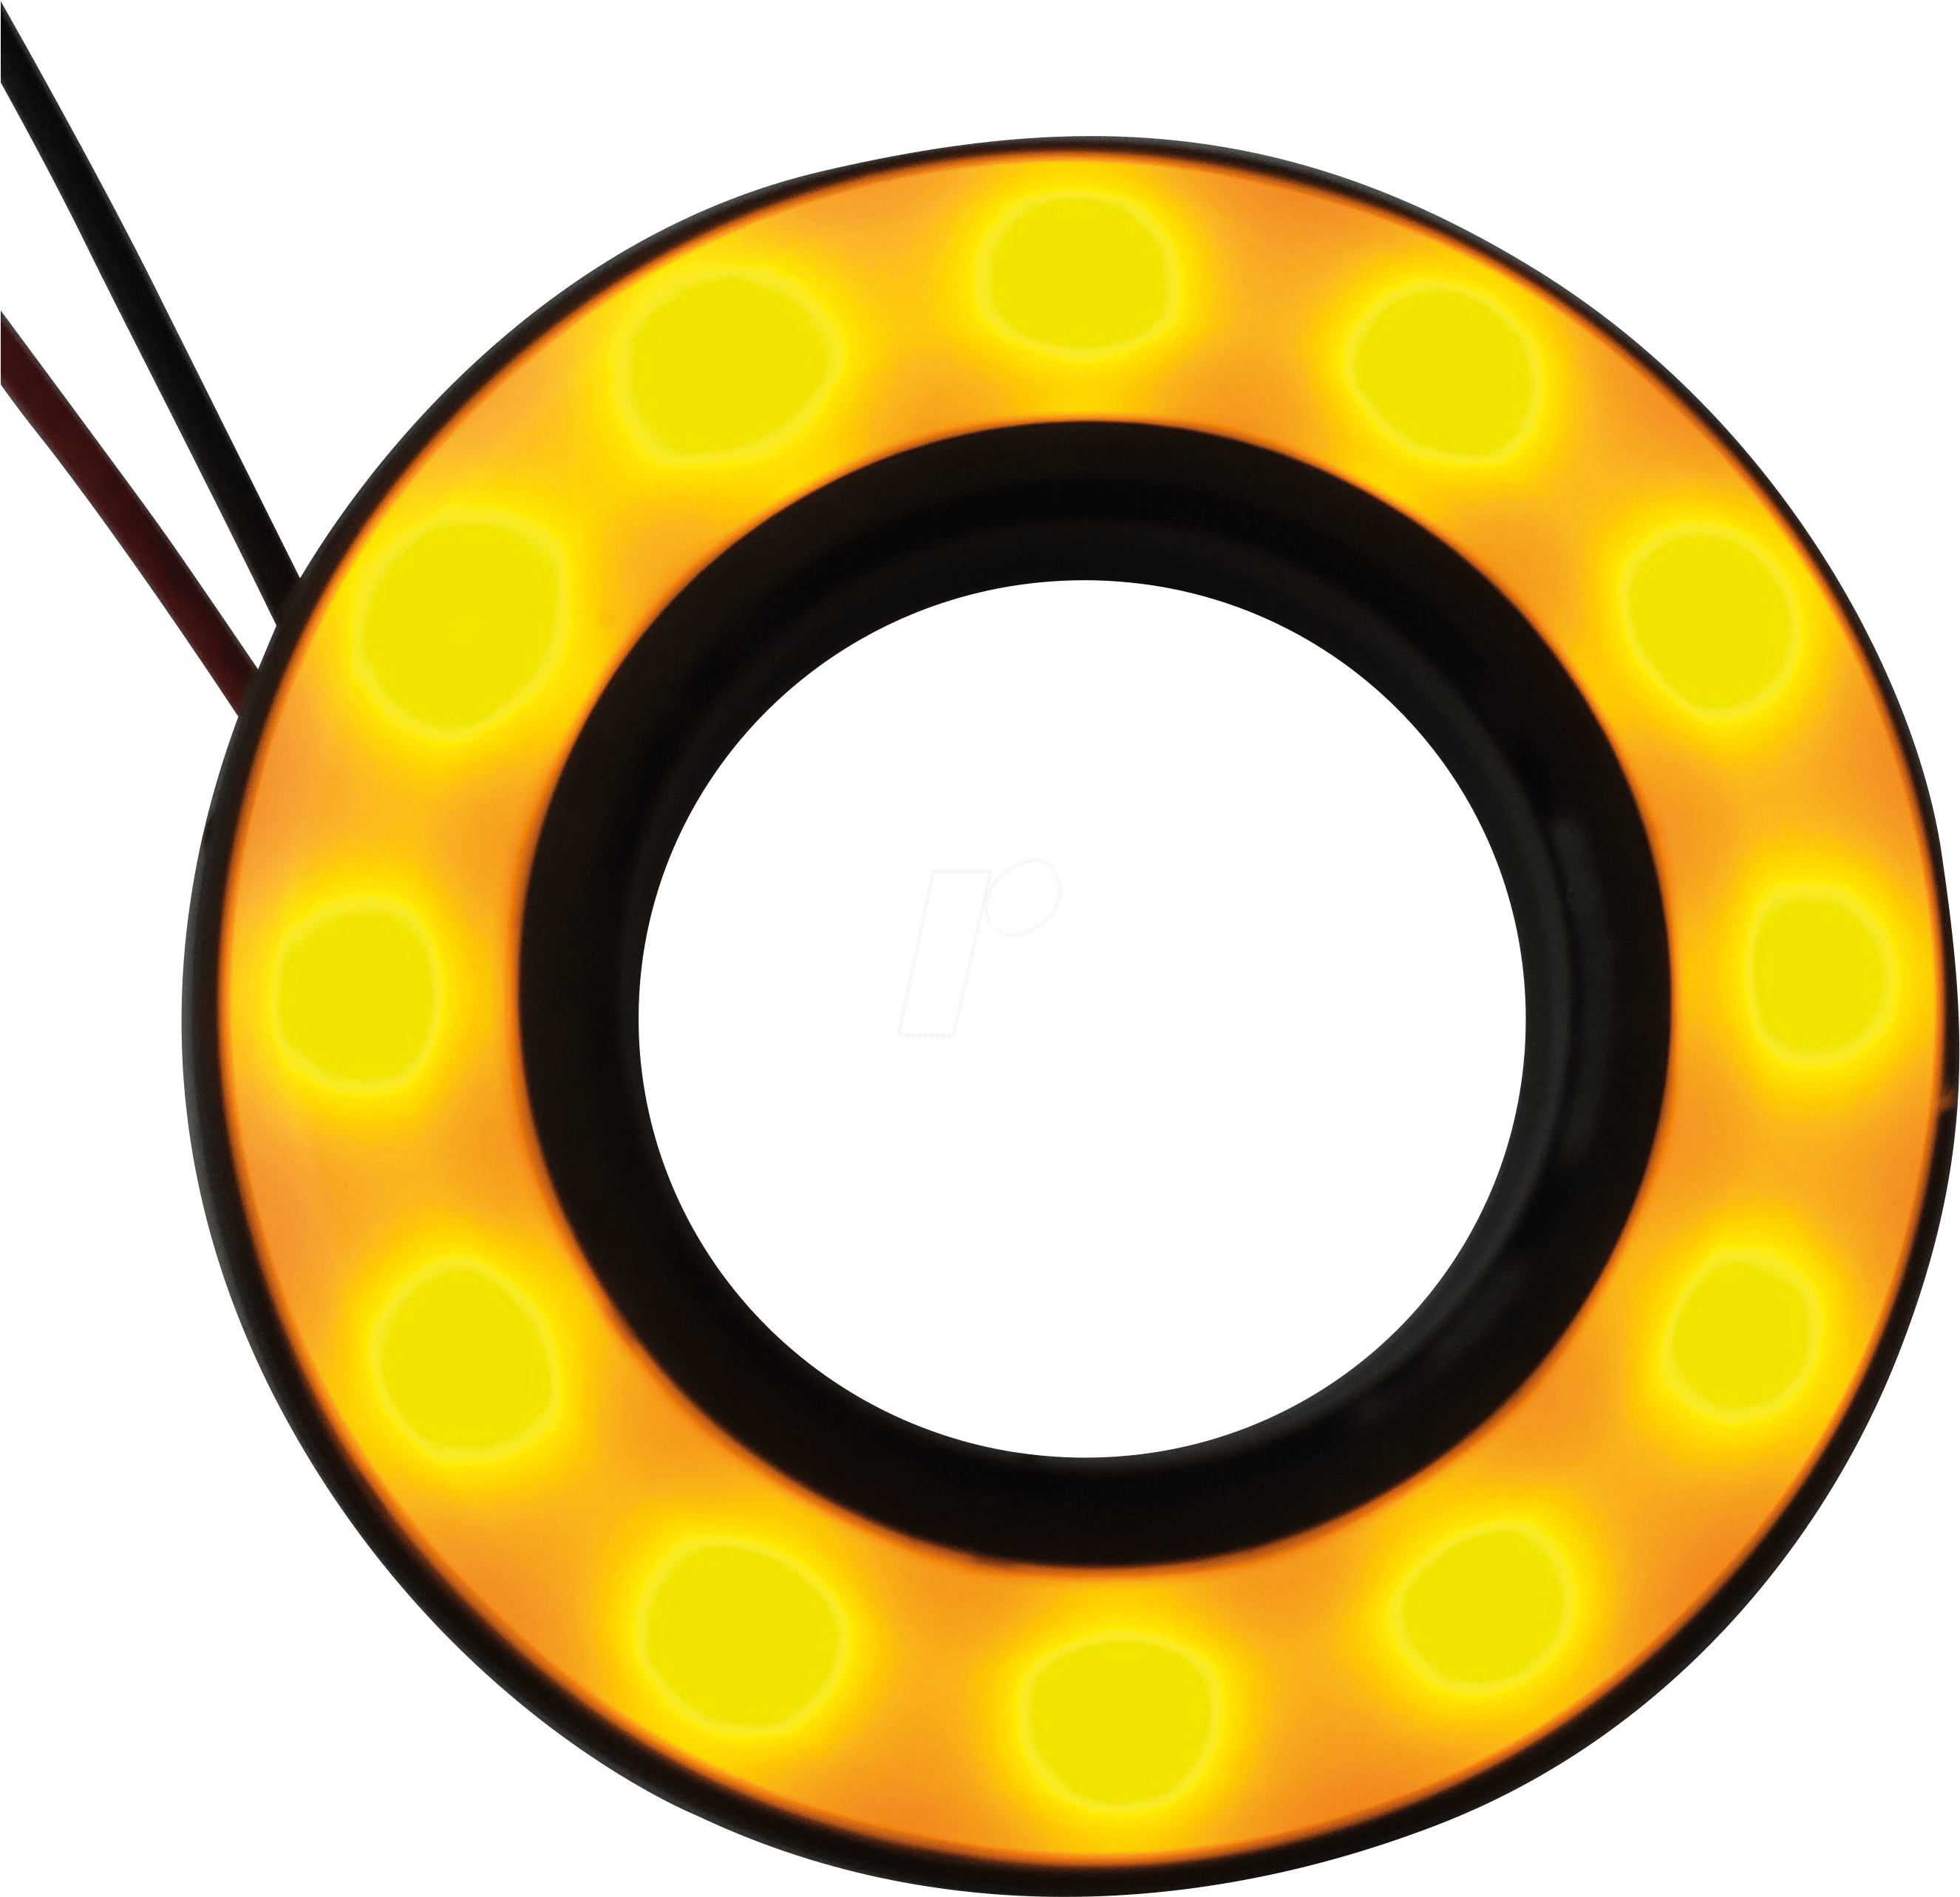 Halo-led, Ø16/35,5 Mm, Yellow, Black, Frosted - Circle (2656x2584)